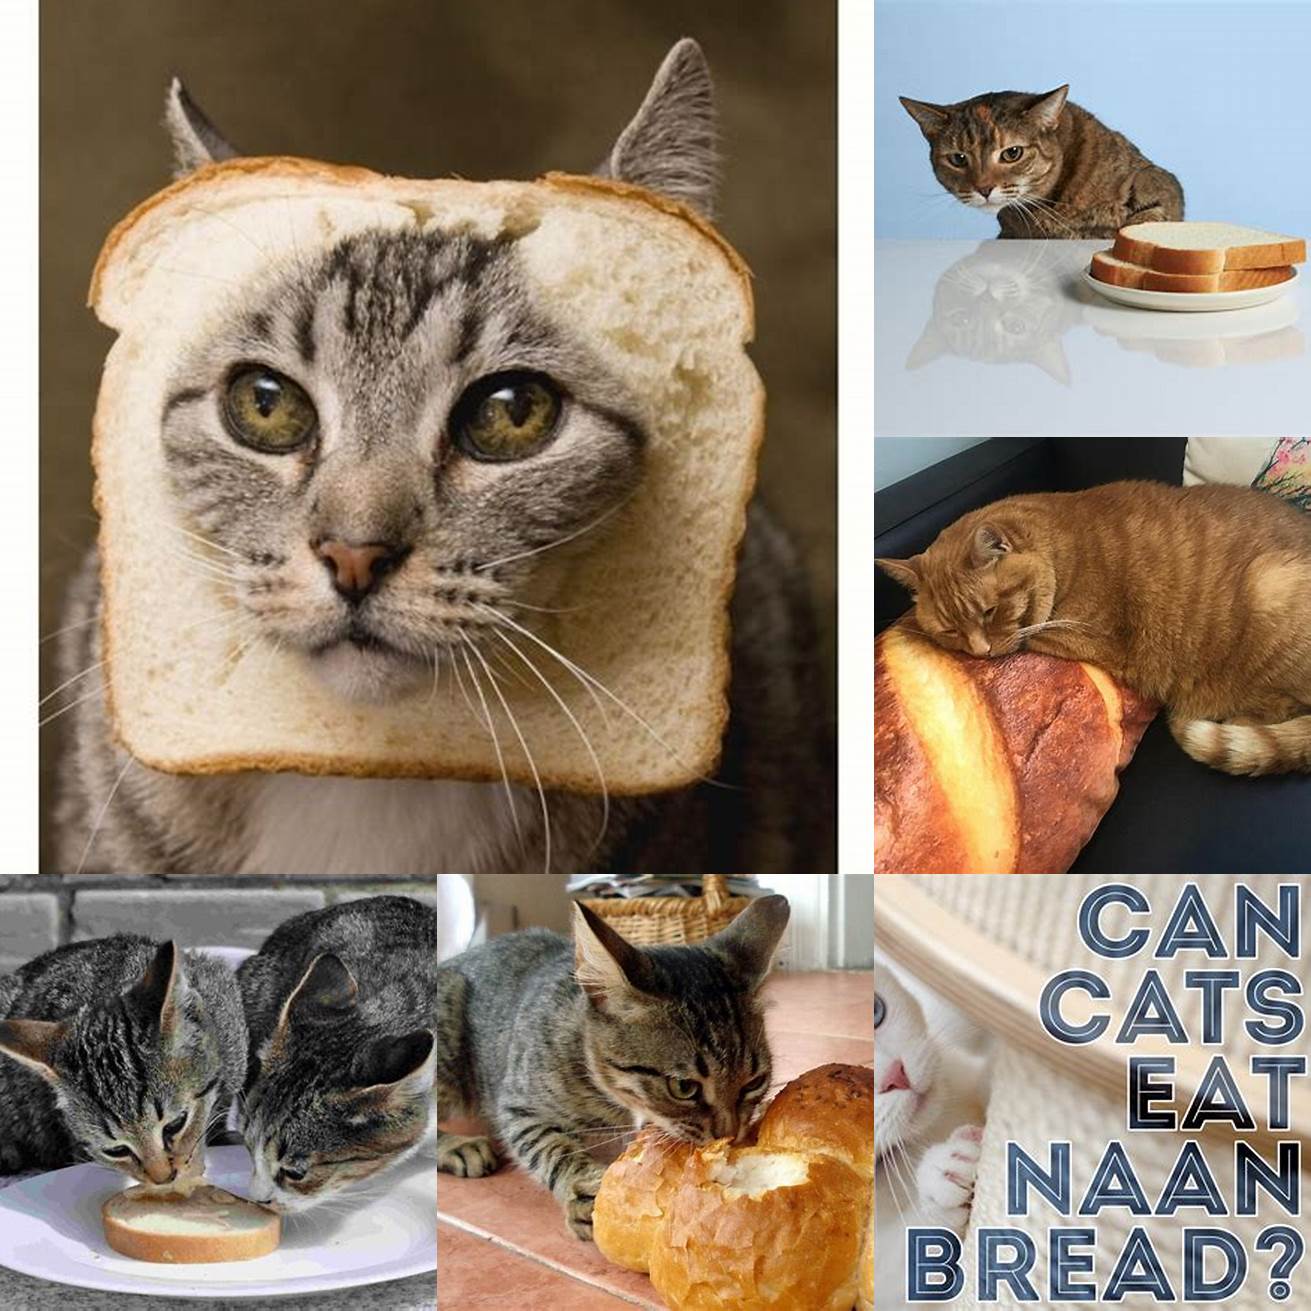 Q Can cats eat bread